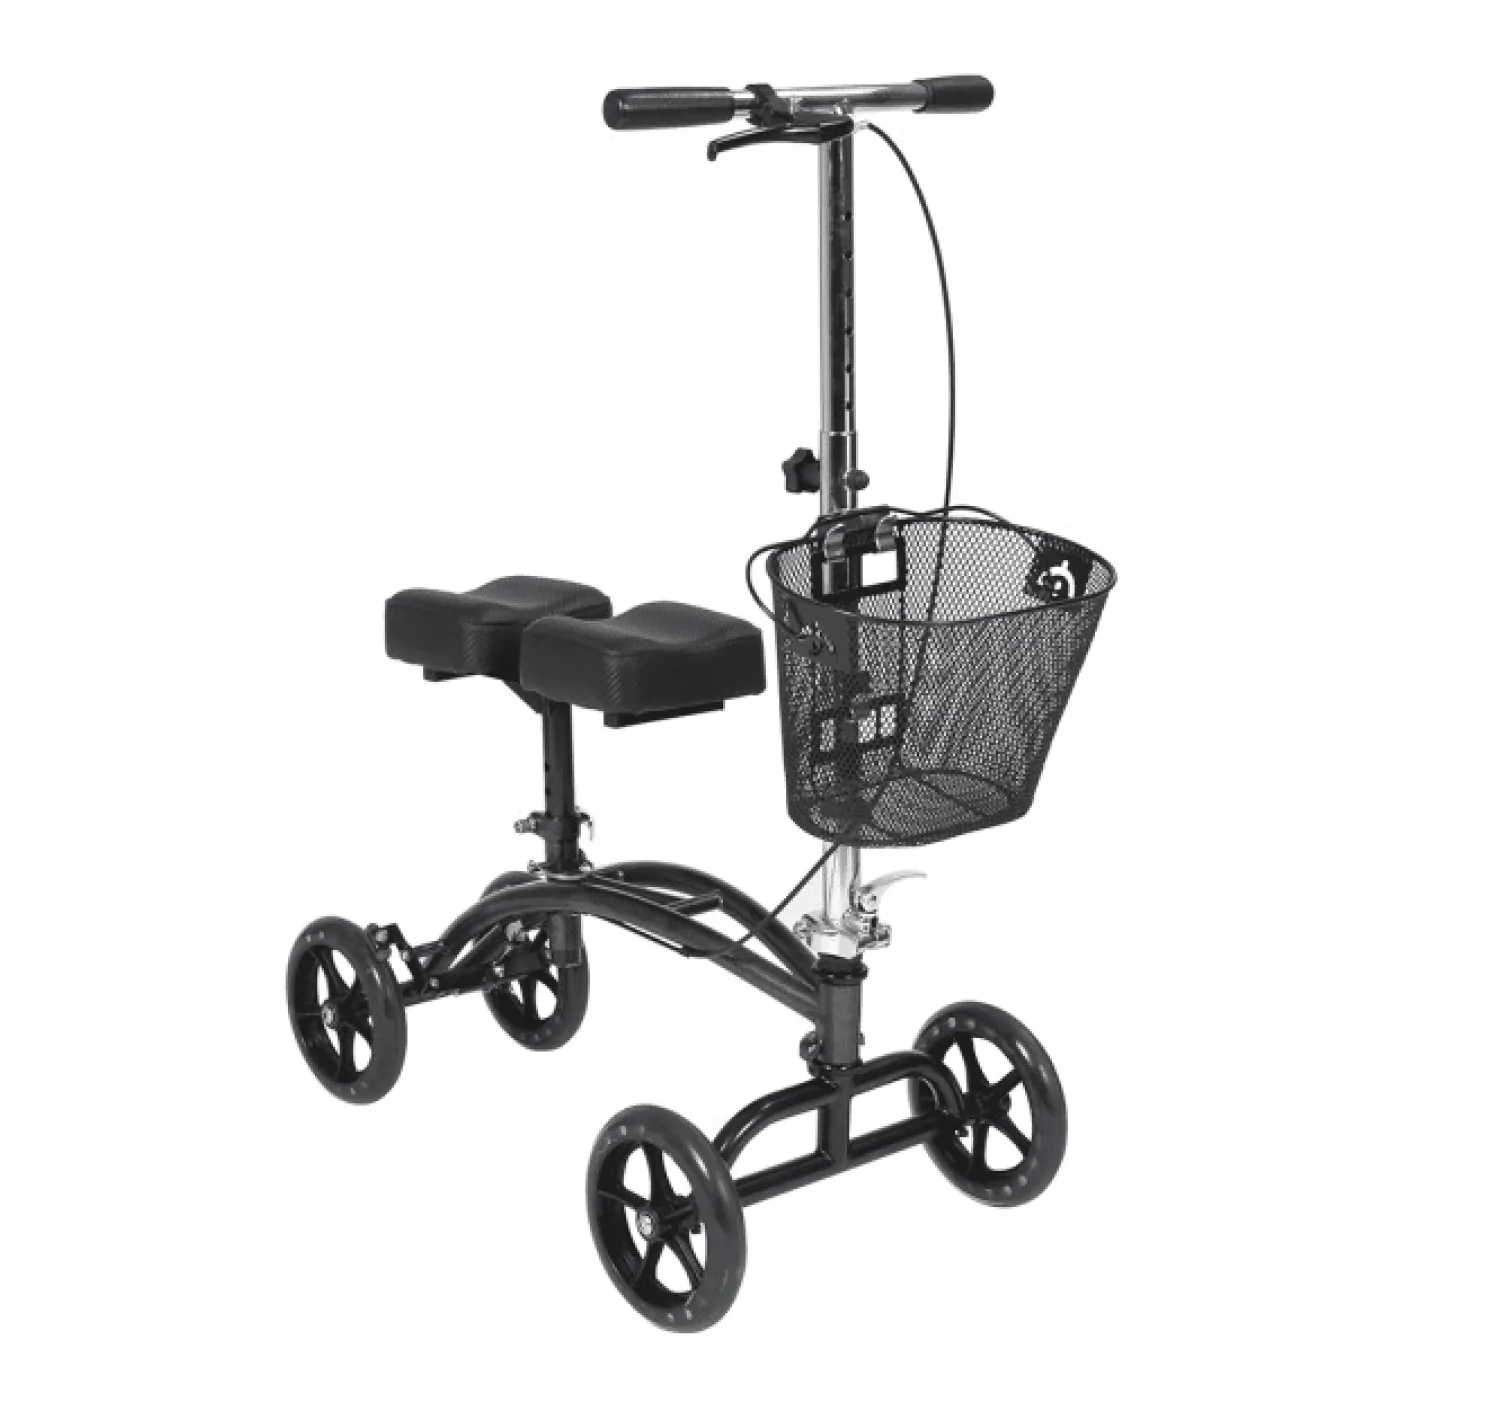 Steerable Knee Walker: Help Inc. - Everyone is relying on you. You can rely on us.